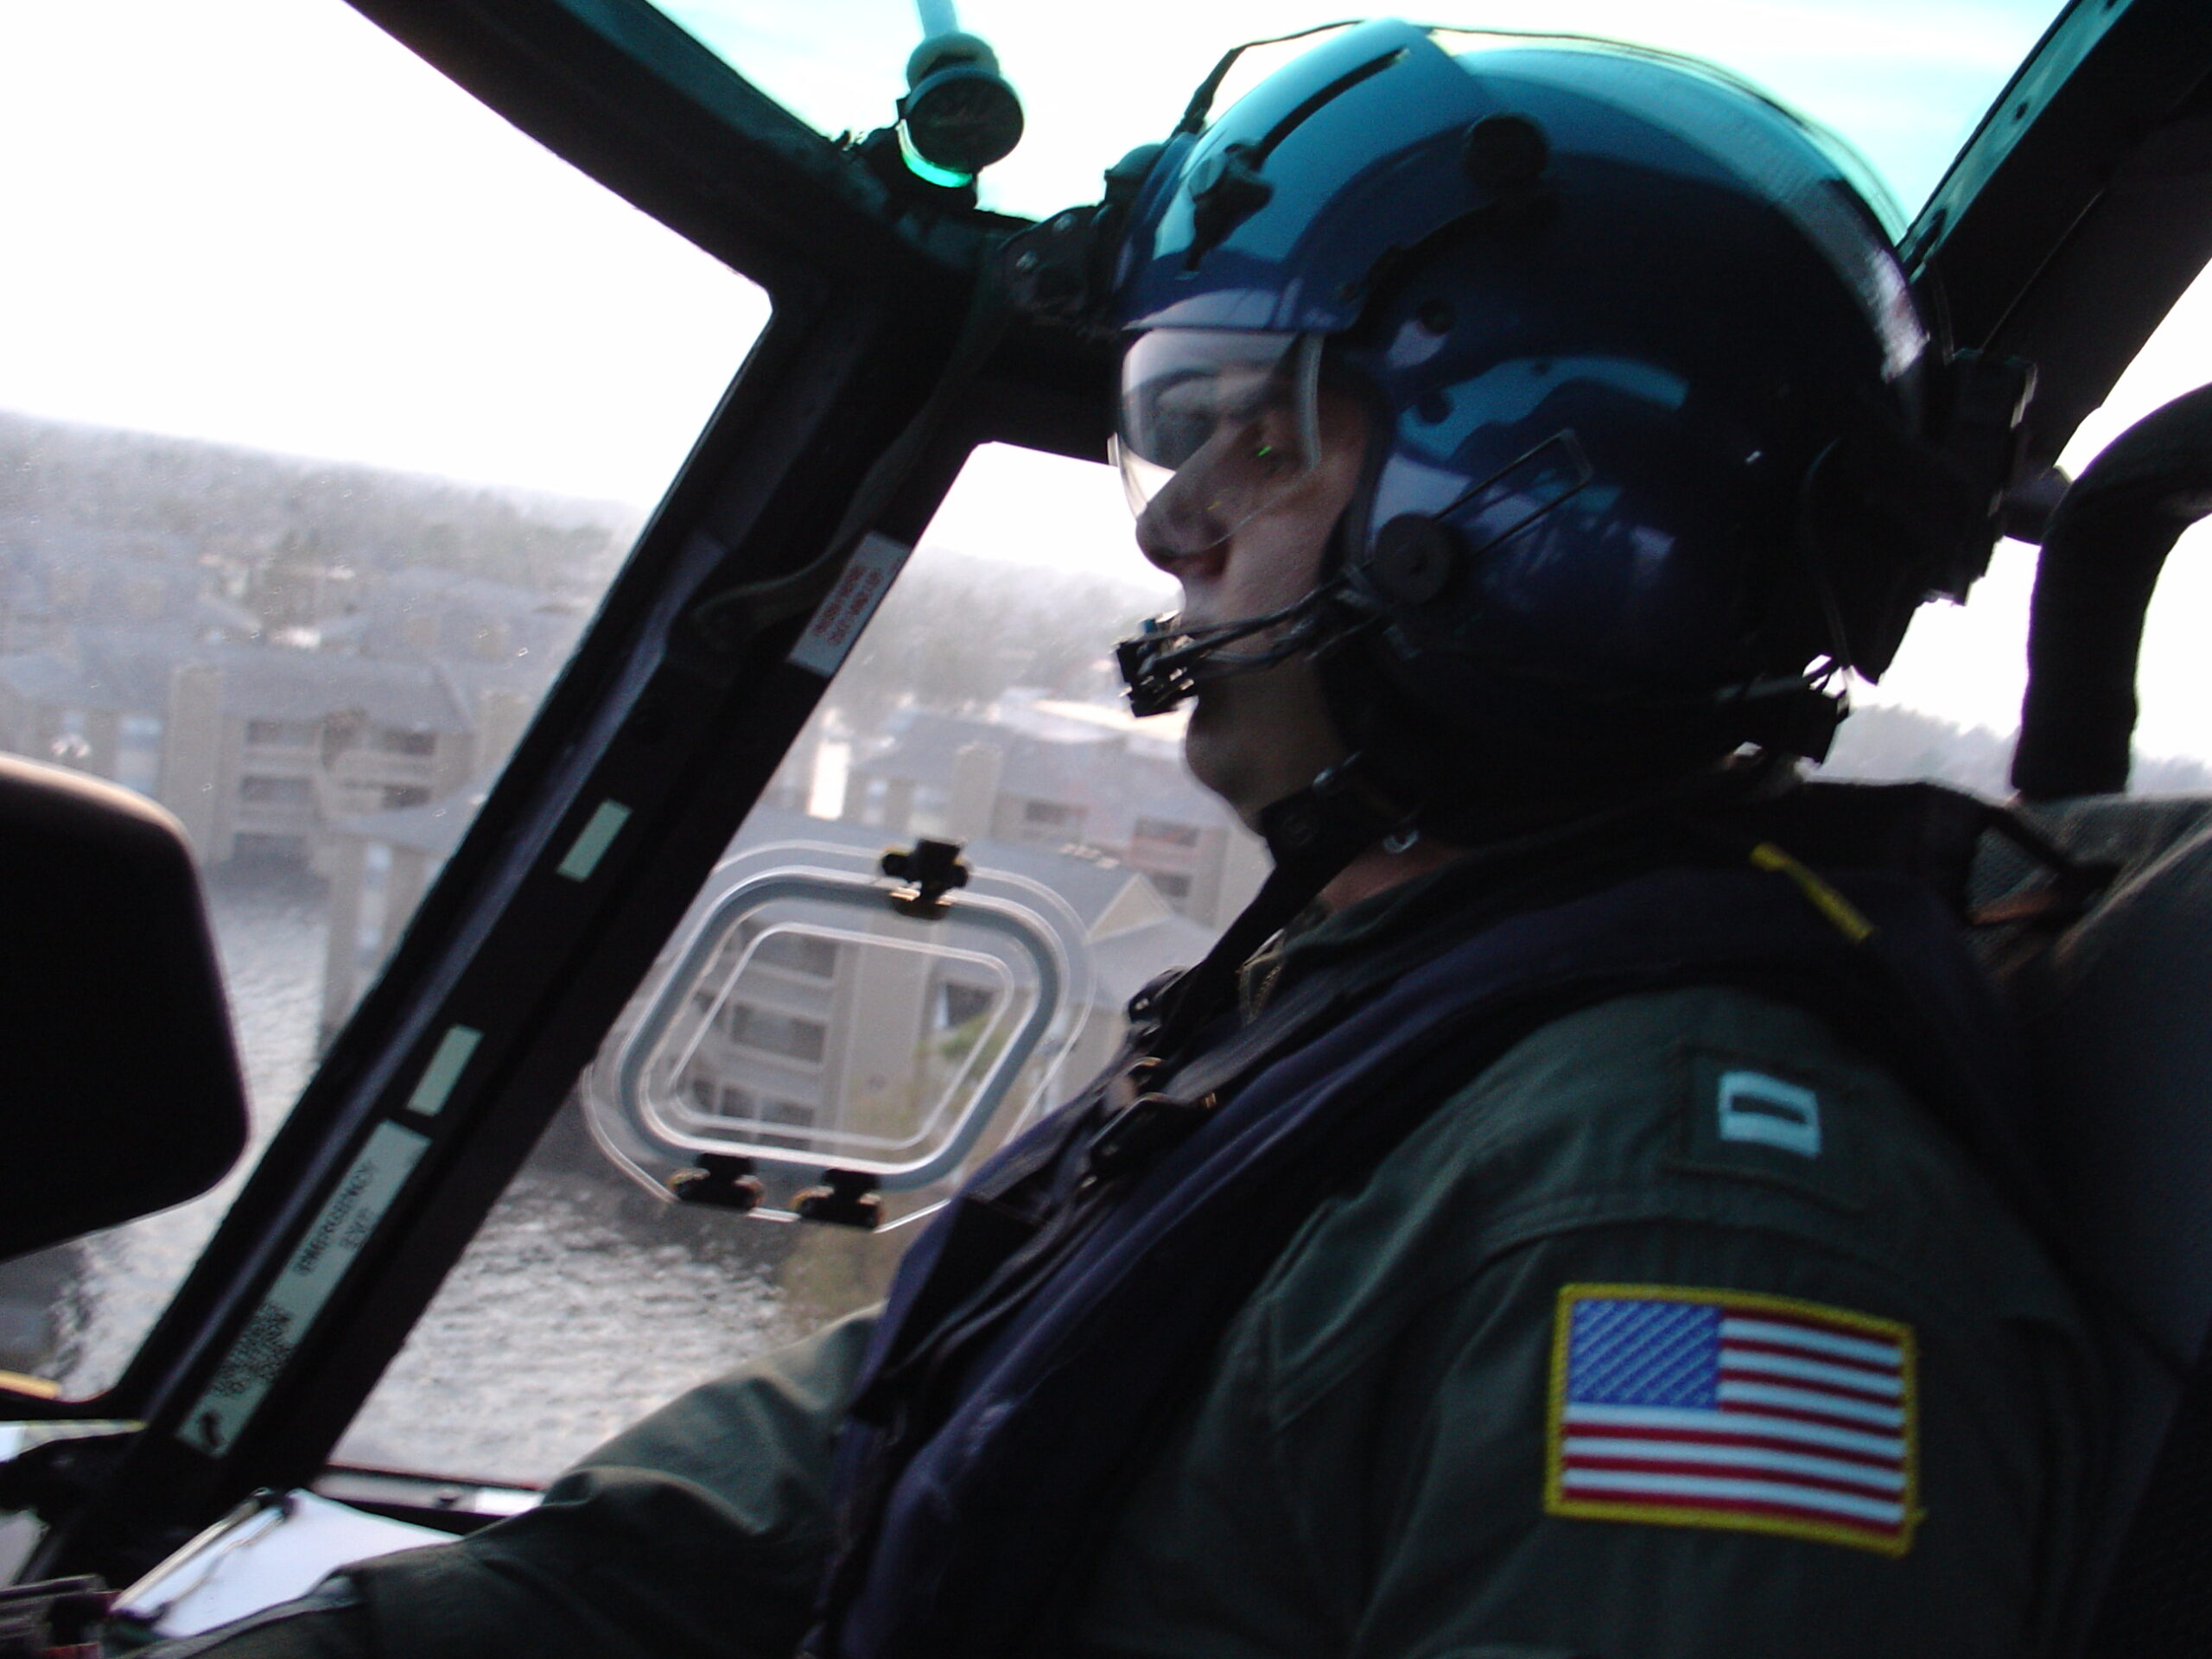 Deus Flying a Rescue Mission after Hurricane Katrina